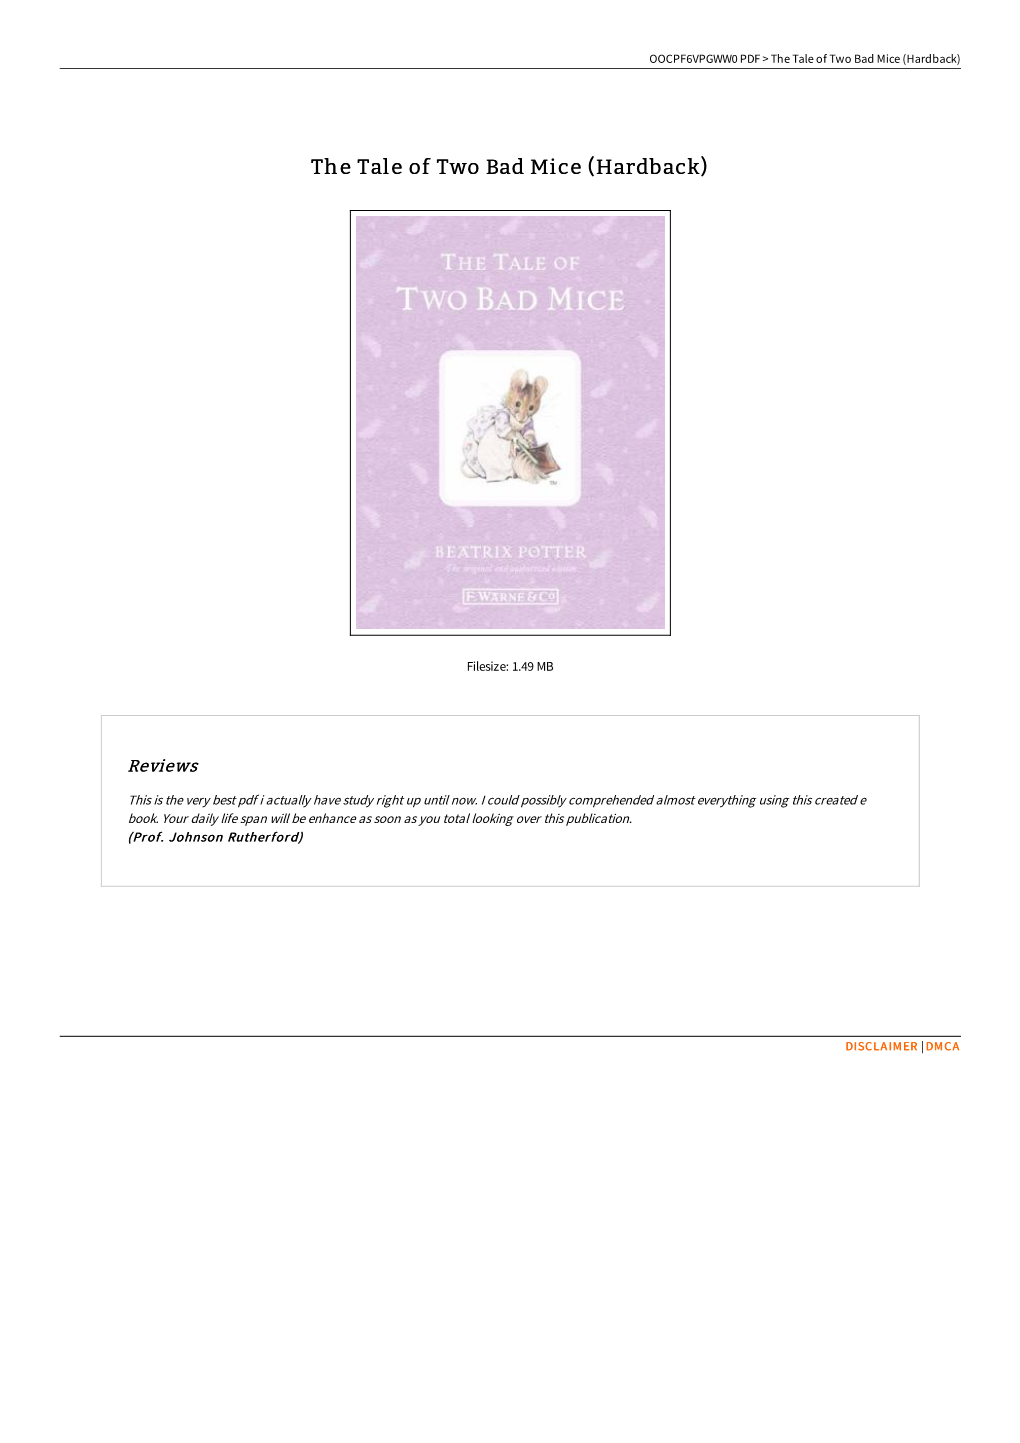 Find Book ^ the Tale of Two Bad Mice (Hardback)